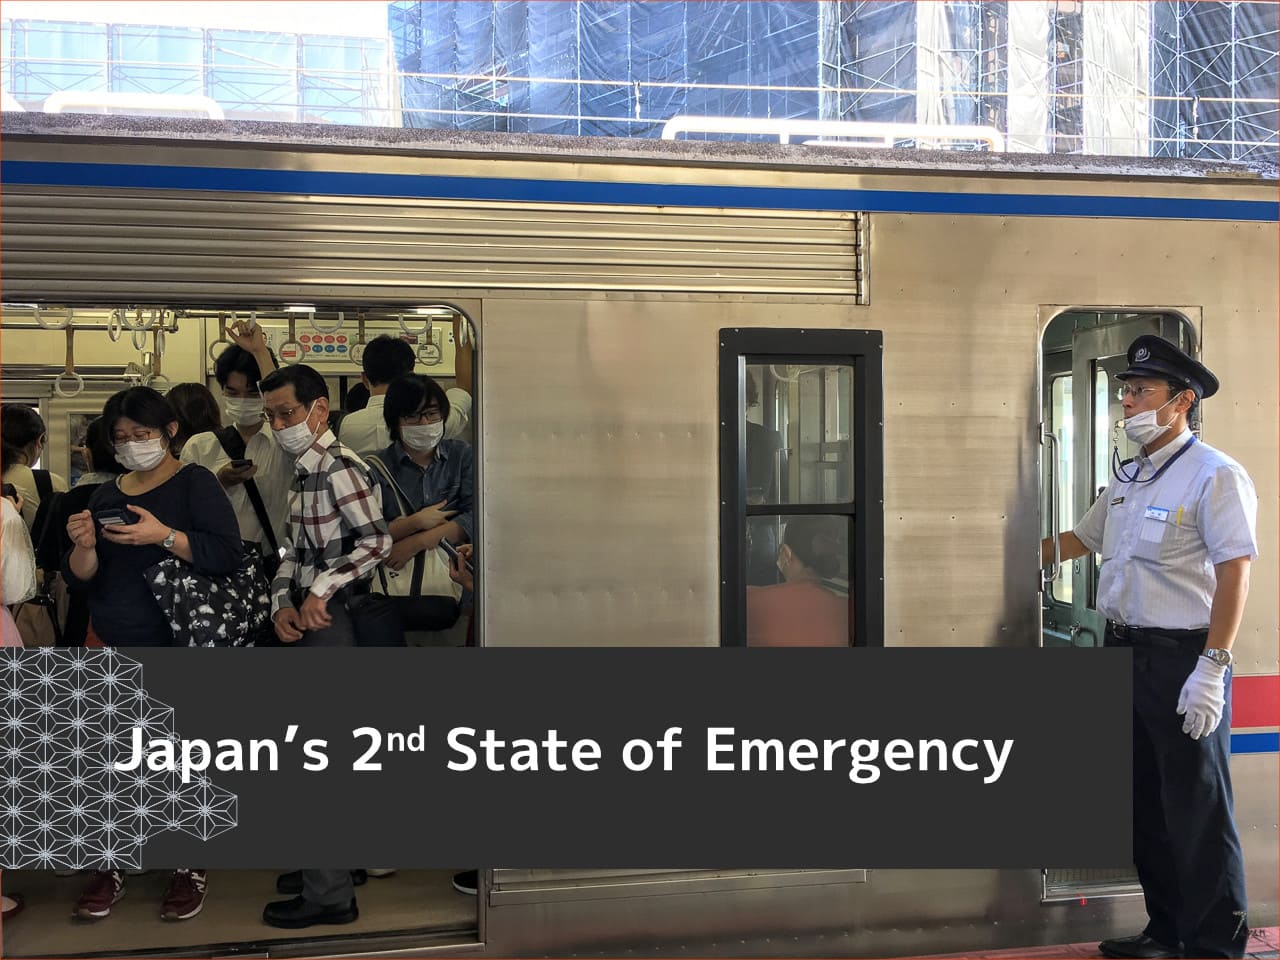 Japan's 2nd state of emergency